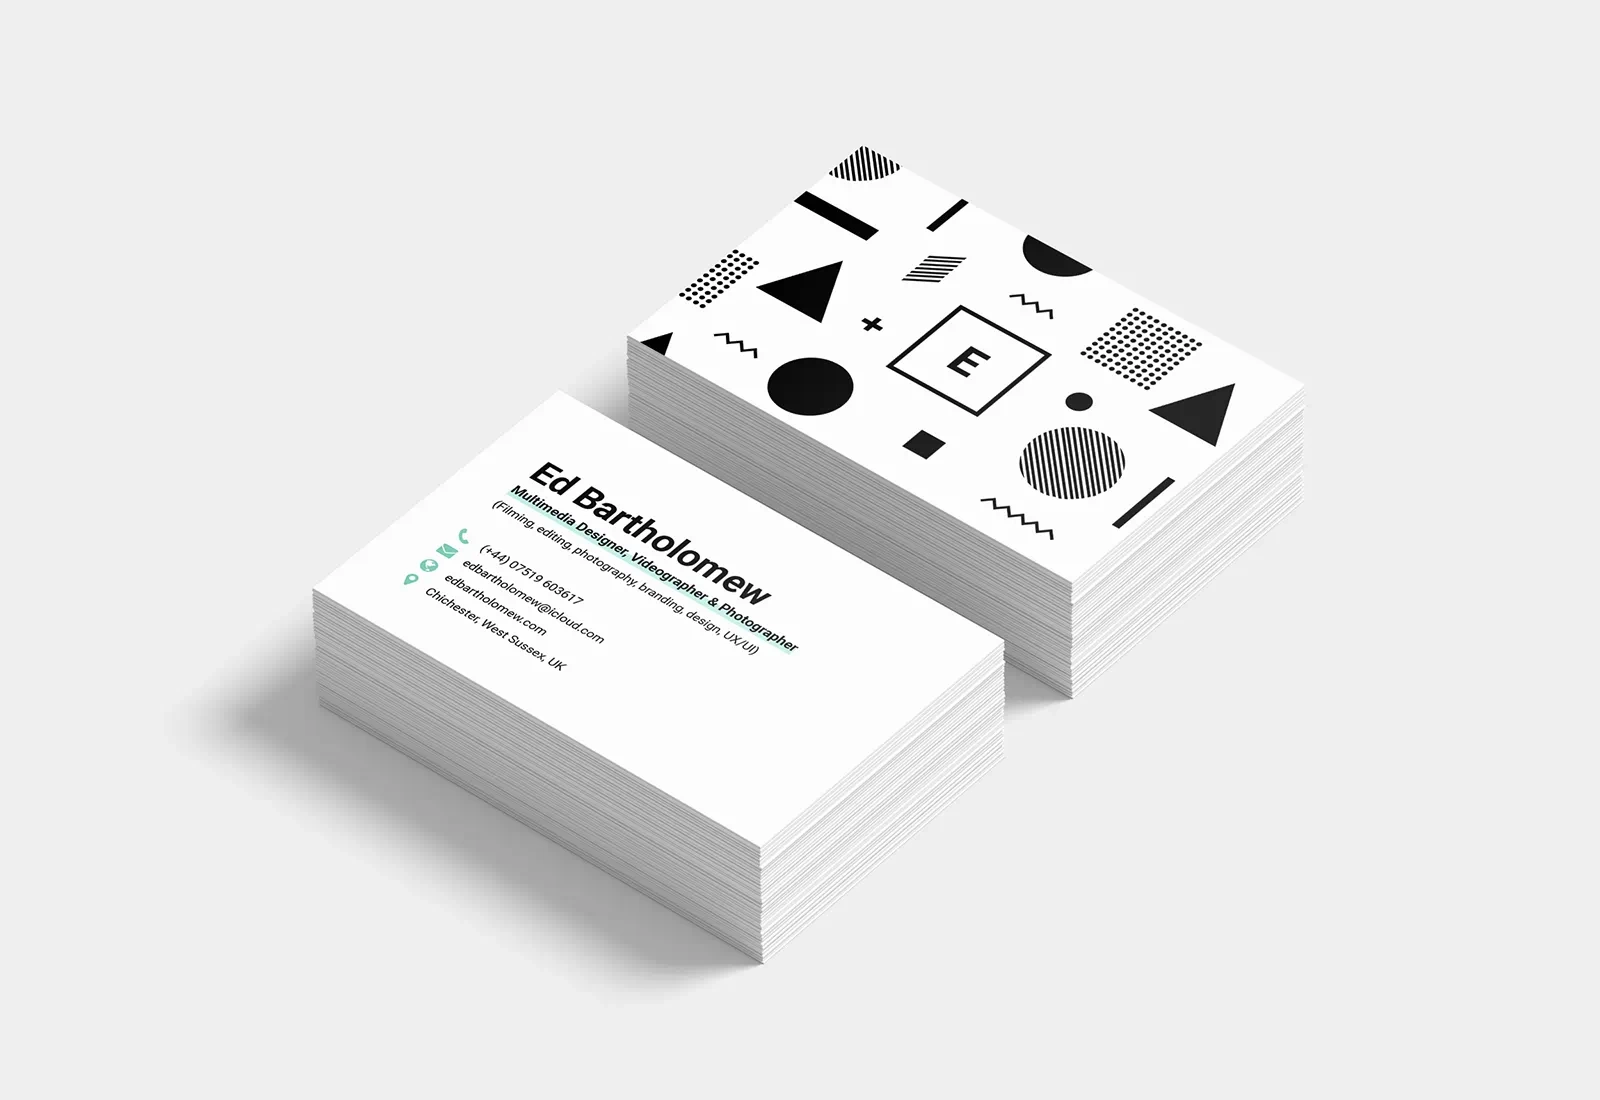 Both the back and the front of the Ed Bartholomew business cards are displayed at a slight angle. The front shows the brand’s logo, surrounded by a variety of shapes in black and white. In a similar design to the website, the back displays my contact information in a clean and modern style